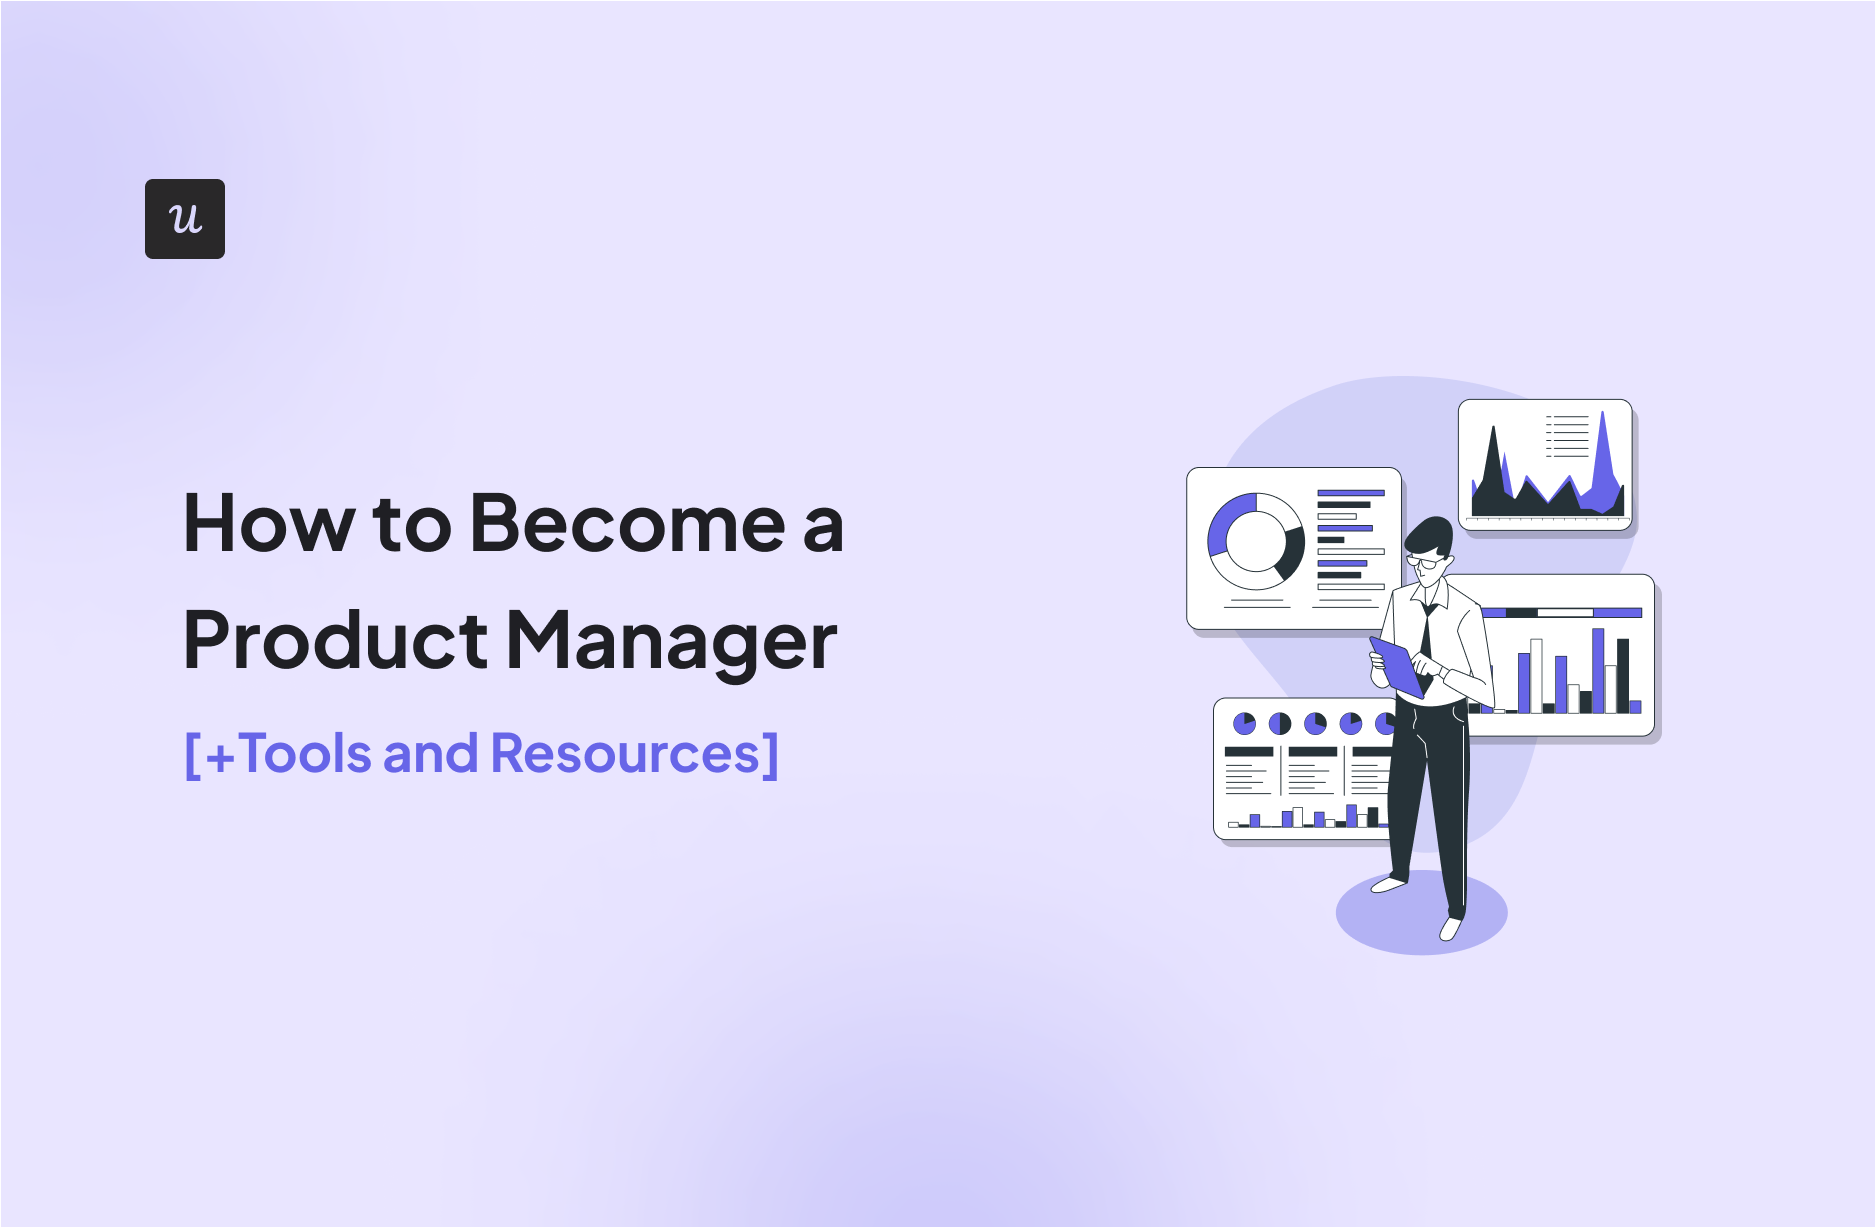 How to Become a Product Manager [+Tools and Resources]